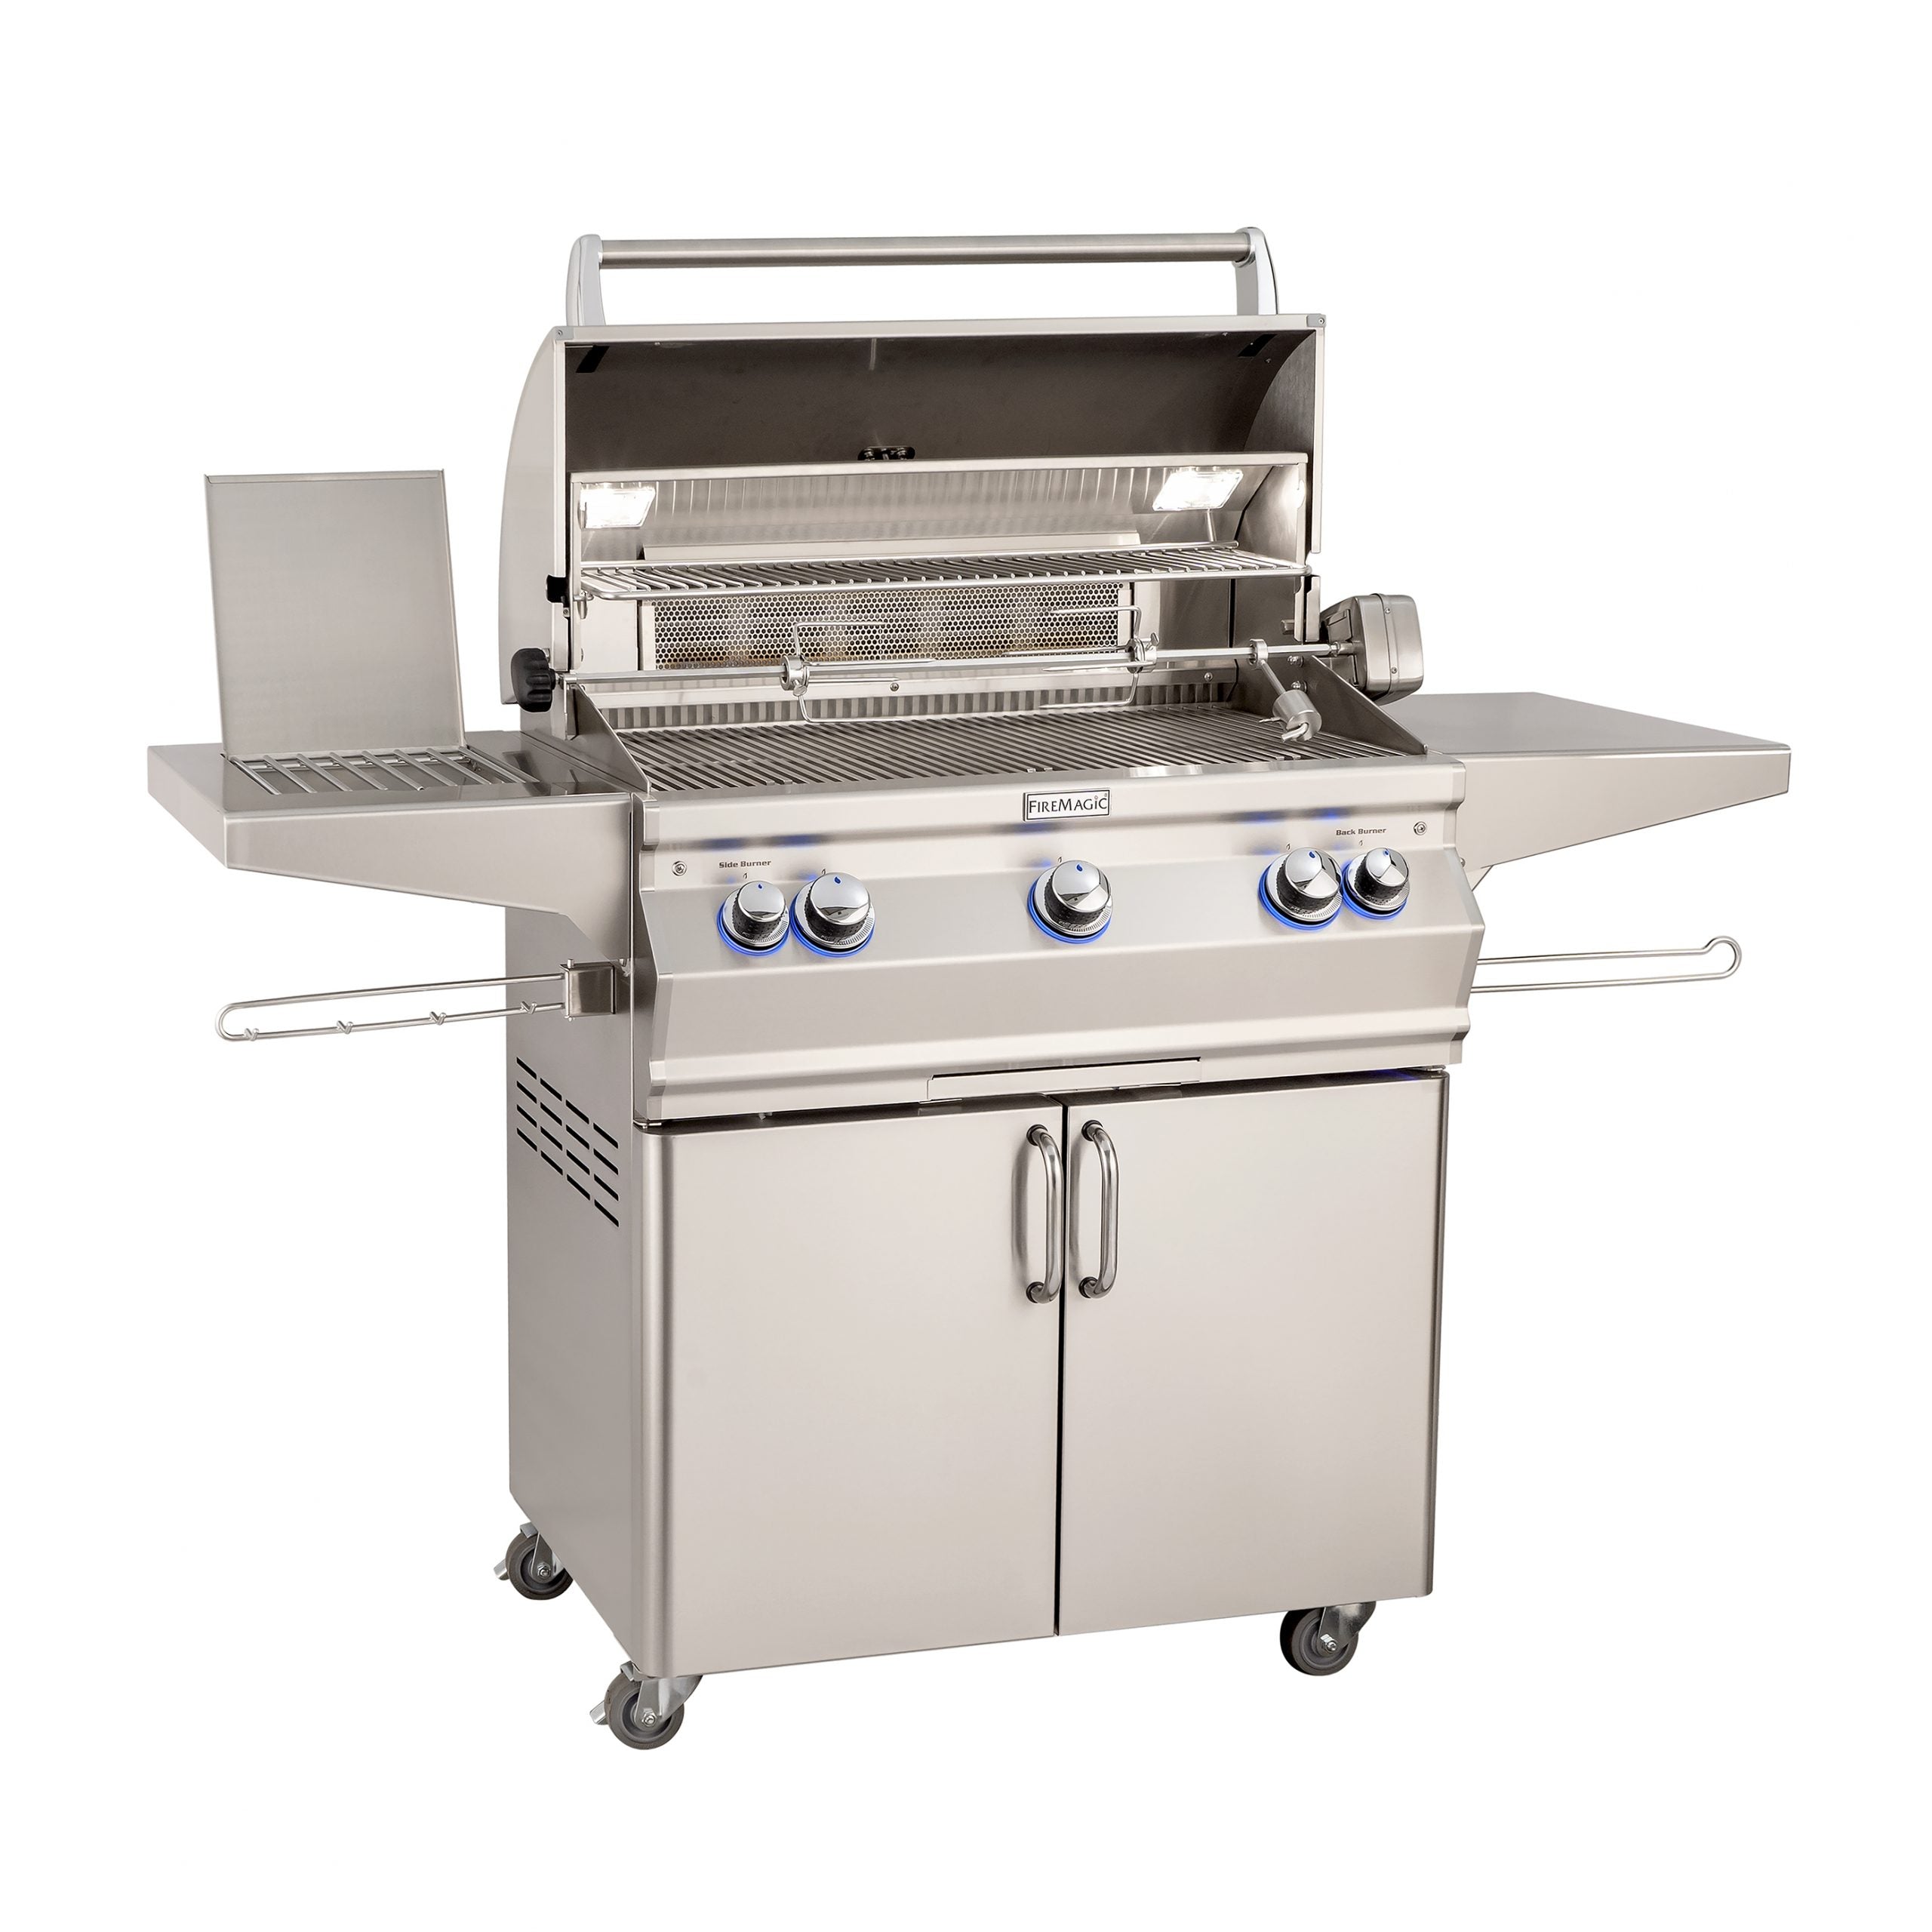 FireMagic | Aurora A540s 30" Portable Grills with Analog Thermometer & Single Side Burner